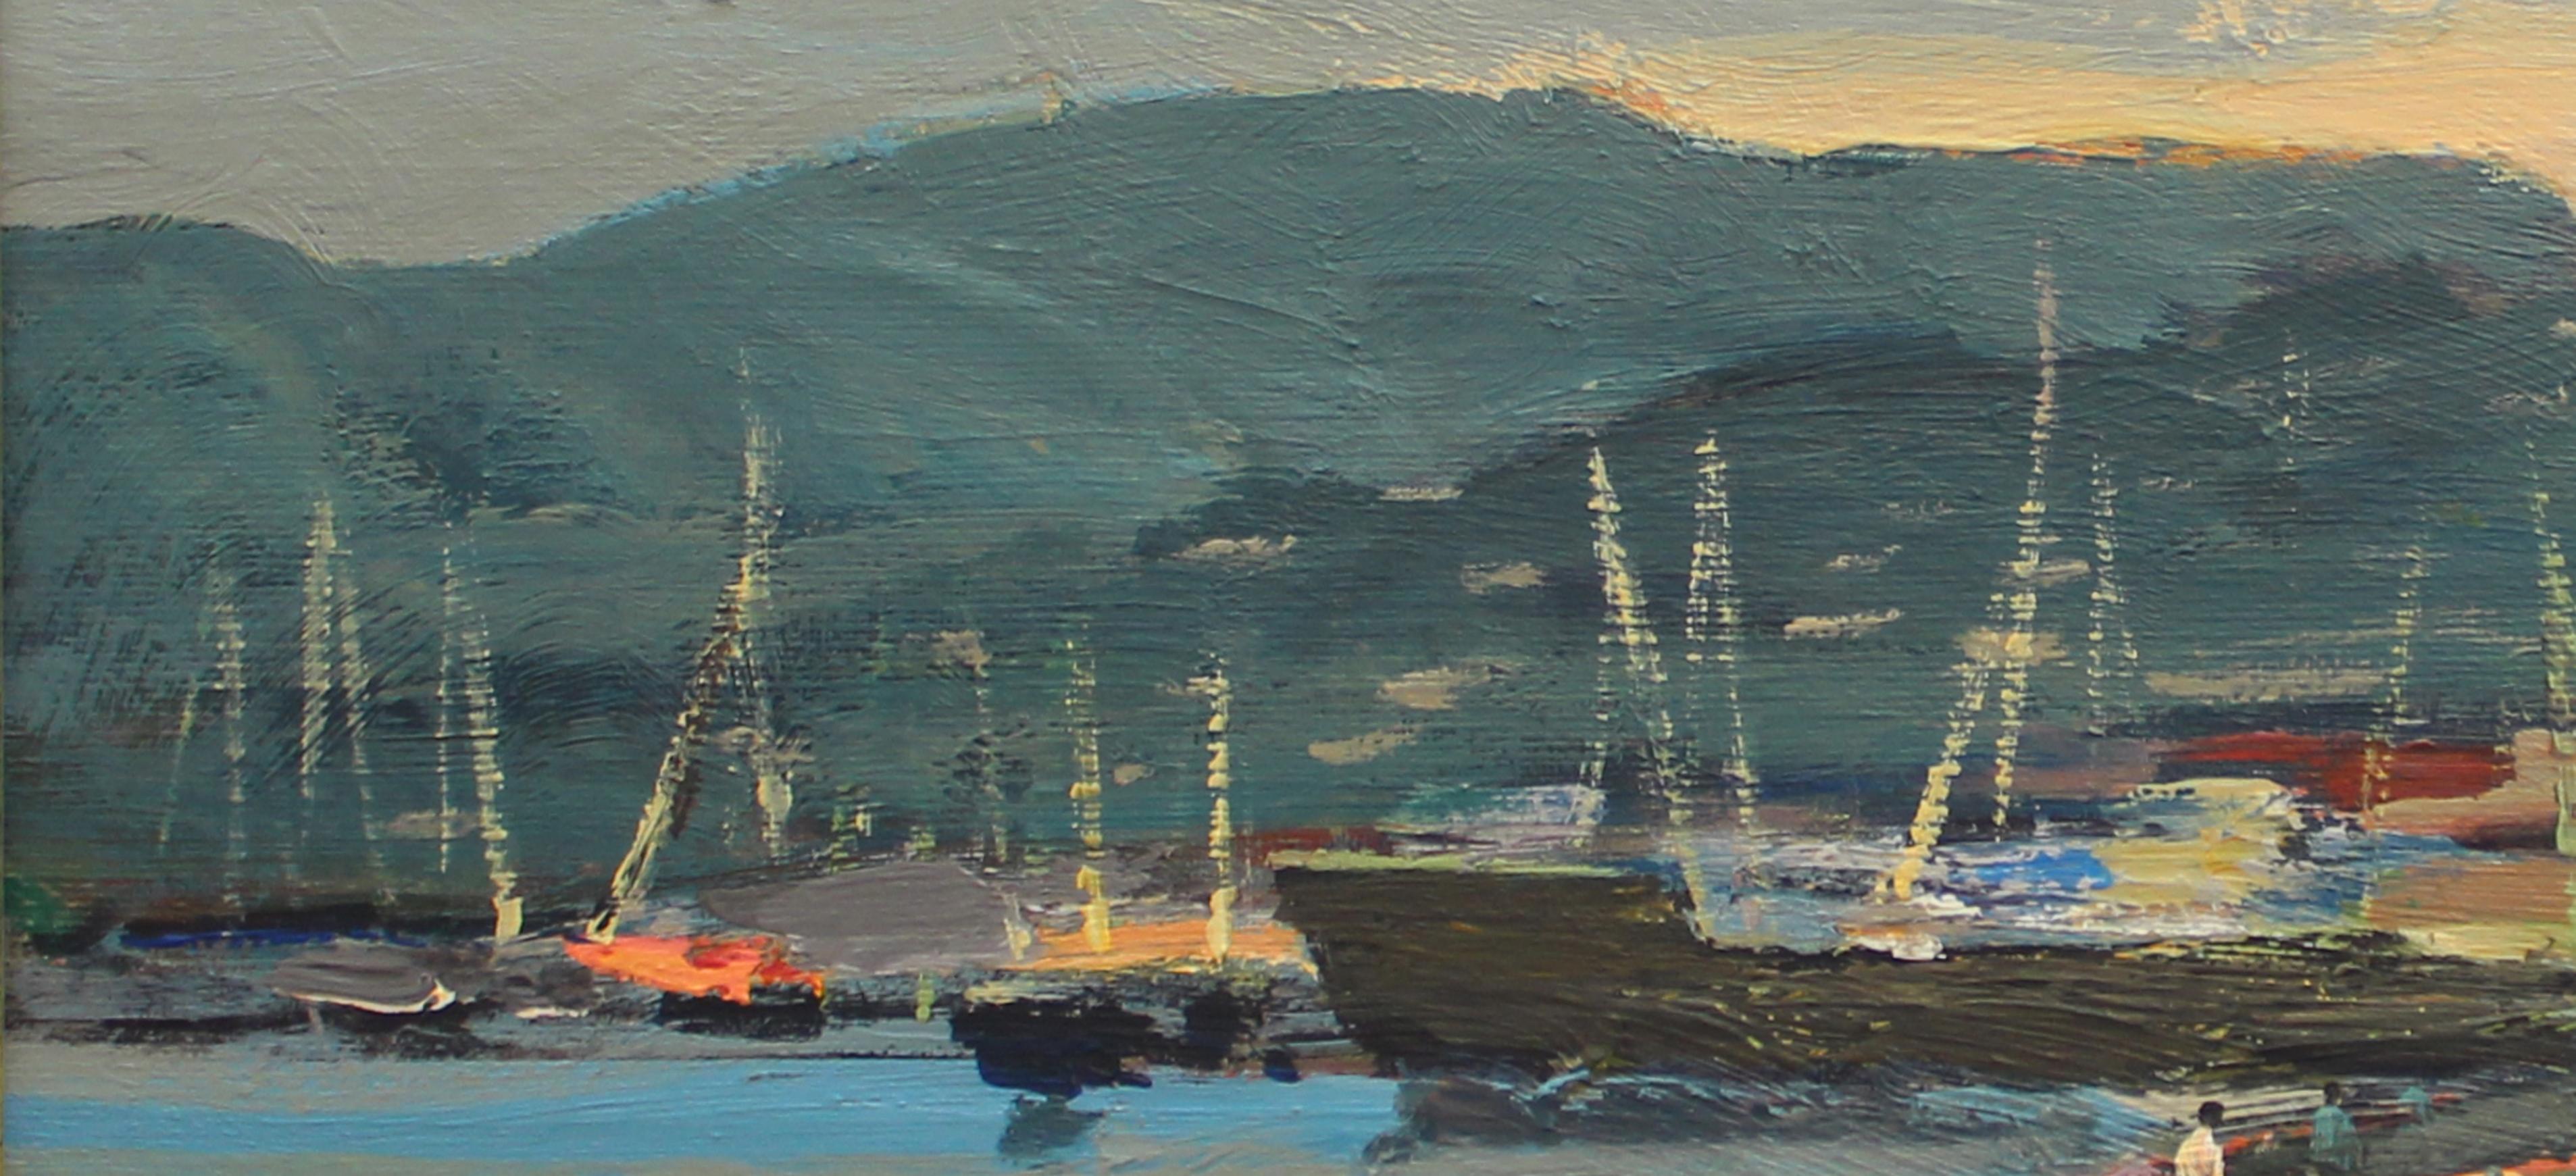 Evening View a Port, Harbor, Original oil Painting, One of a Kind - Gray Landscape Painting by Ara H. Hakobyan